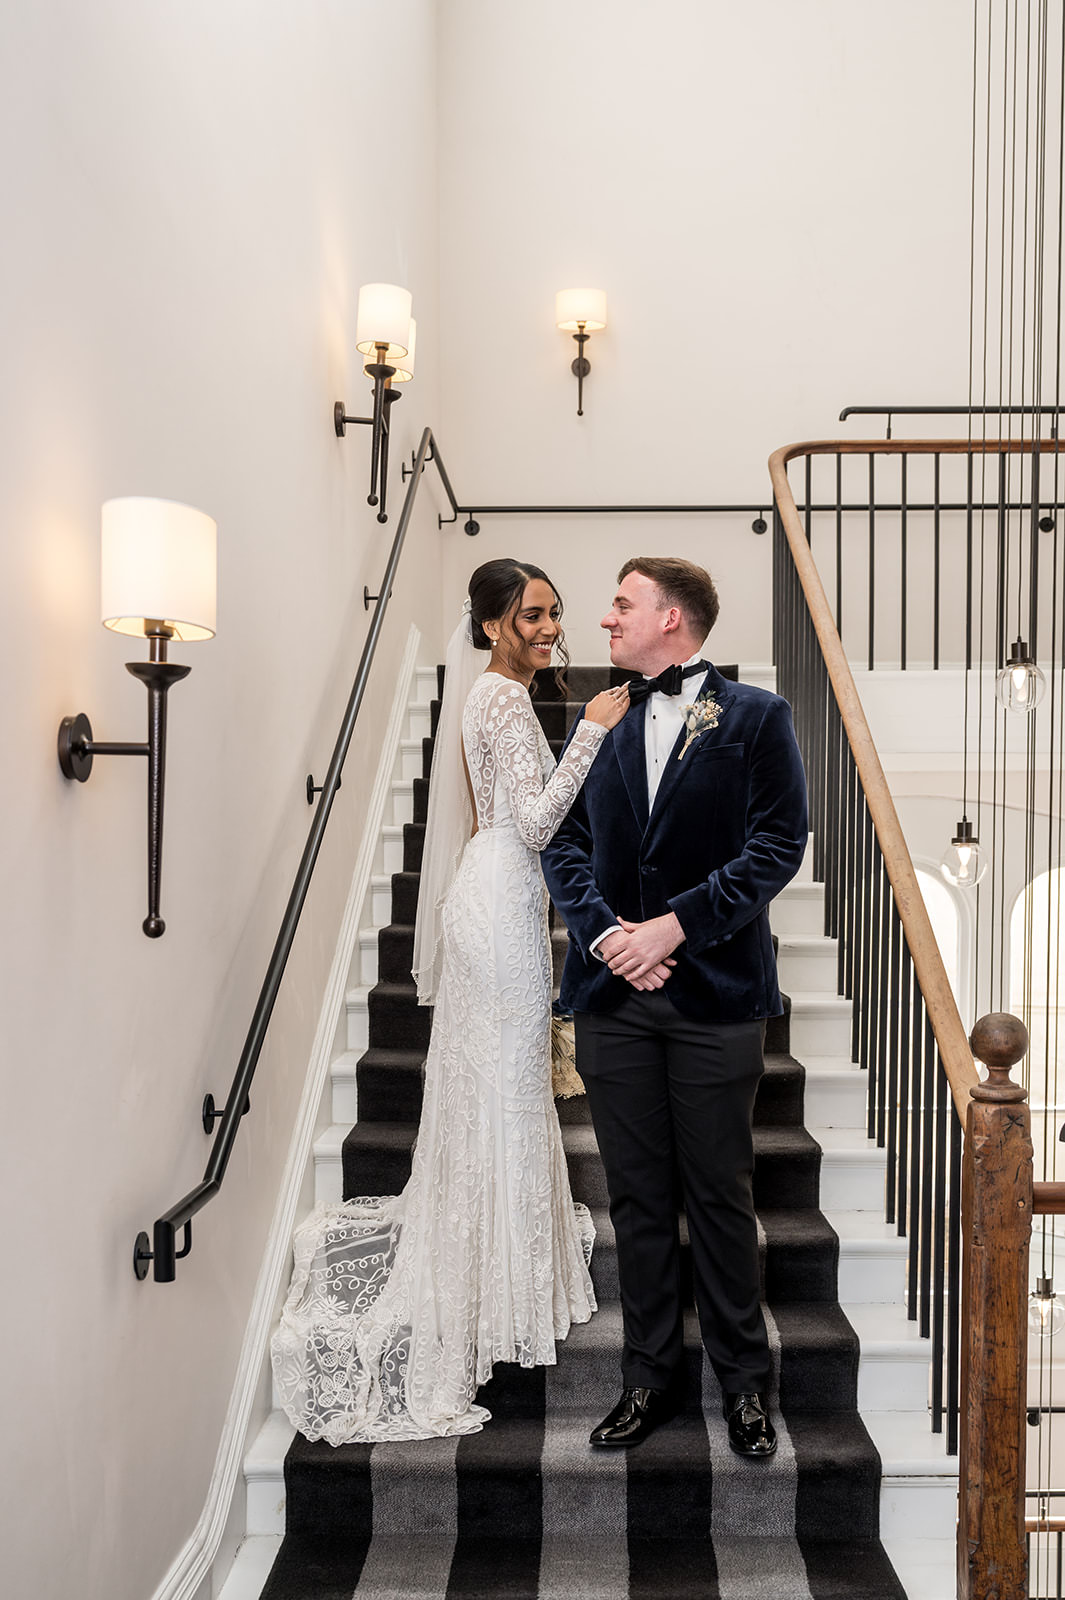 Bride and groom standing on the staircase in the Gainsborough hotel in Bath